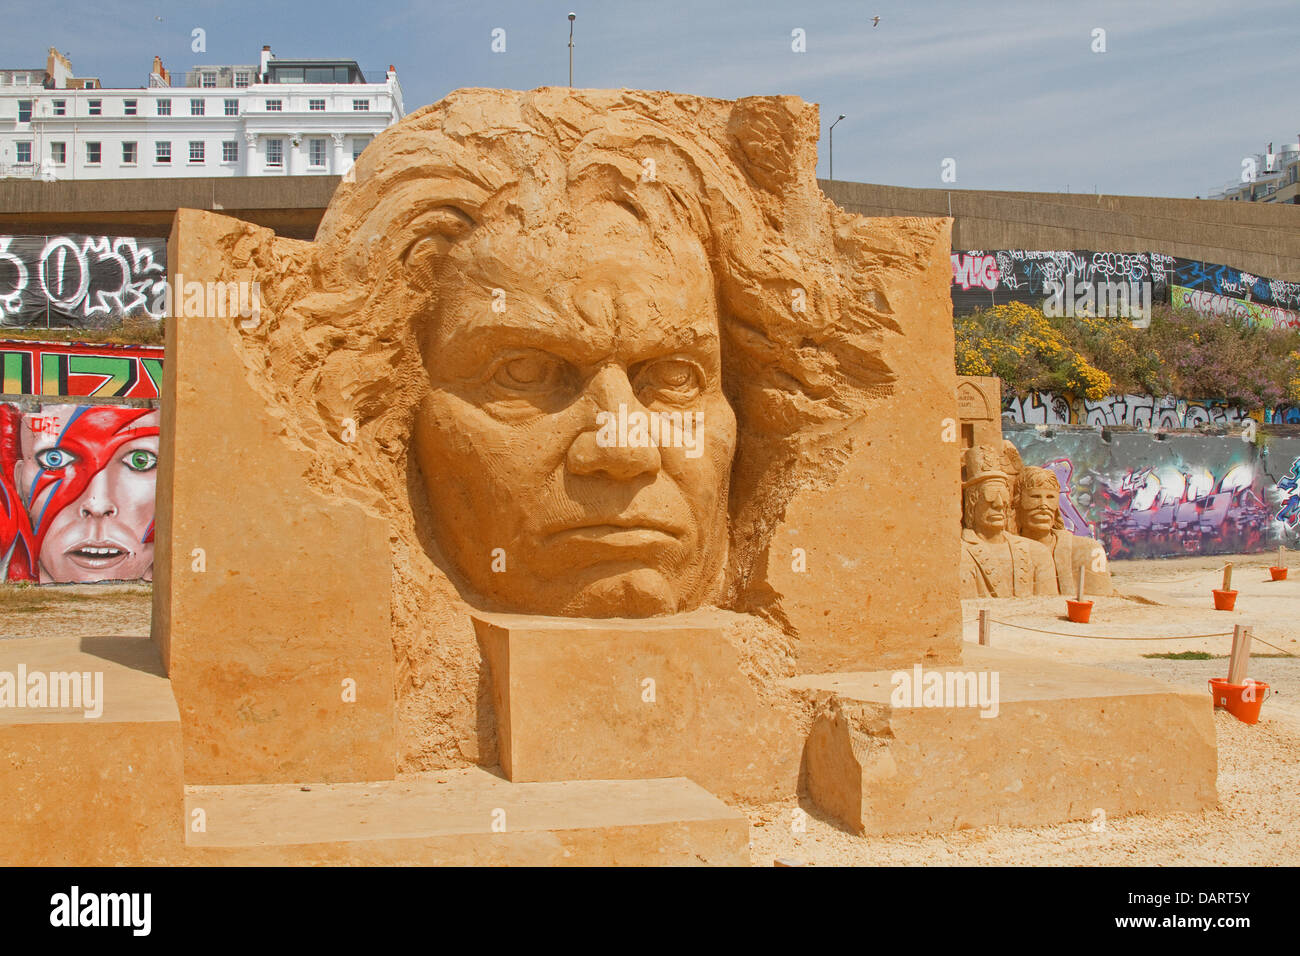 Brighton,UK,17th July 2013, Beethoven's sand sculpture in Brighton Credit: Keith Larby/Alamy Live News Stock Photo